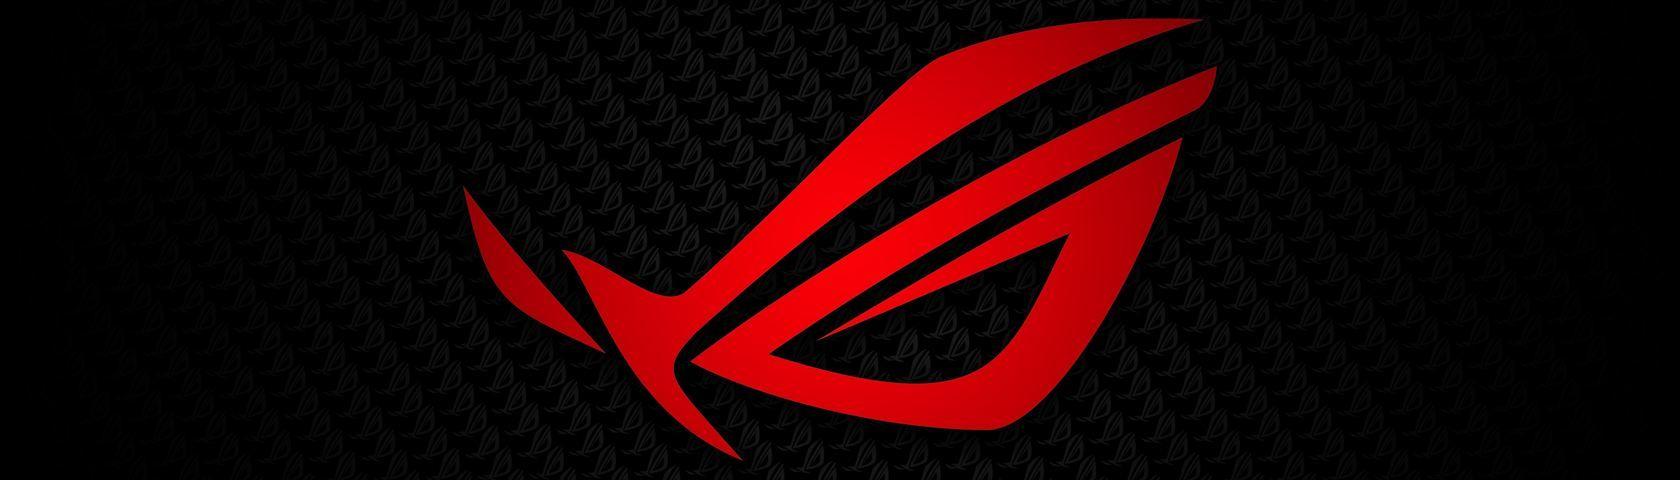 Asus Republic Of Gamers ROG • Image • WallpaperFusion by Binary Fortress Software